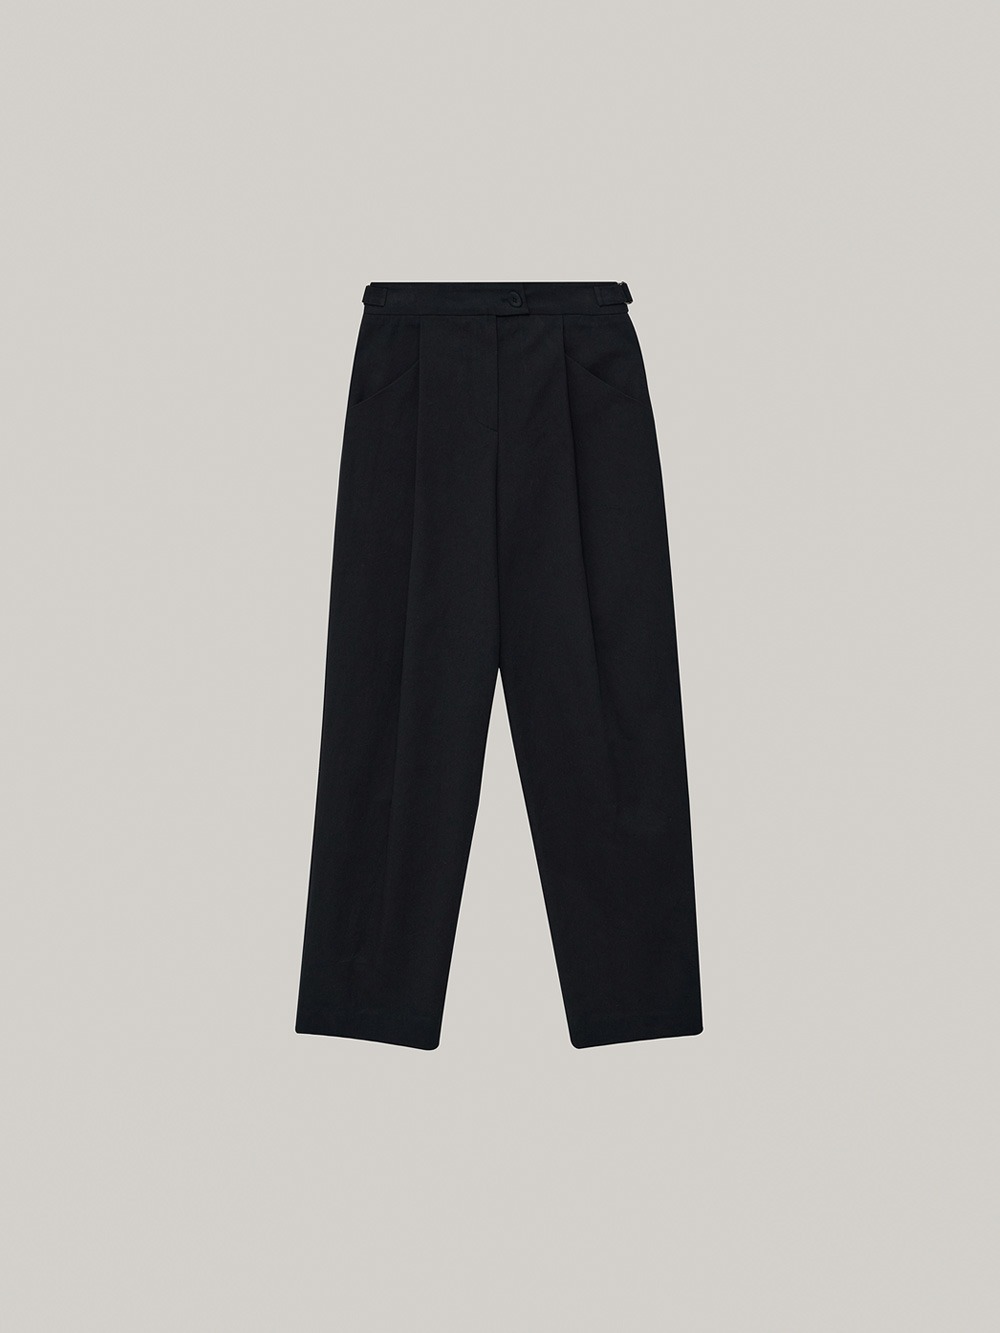 Rounded Tuck Pants (black)